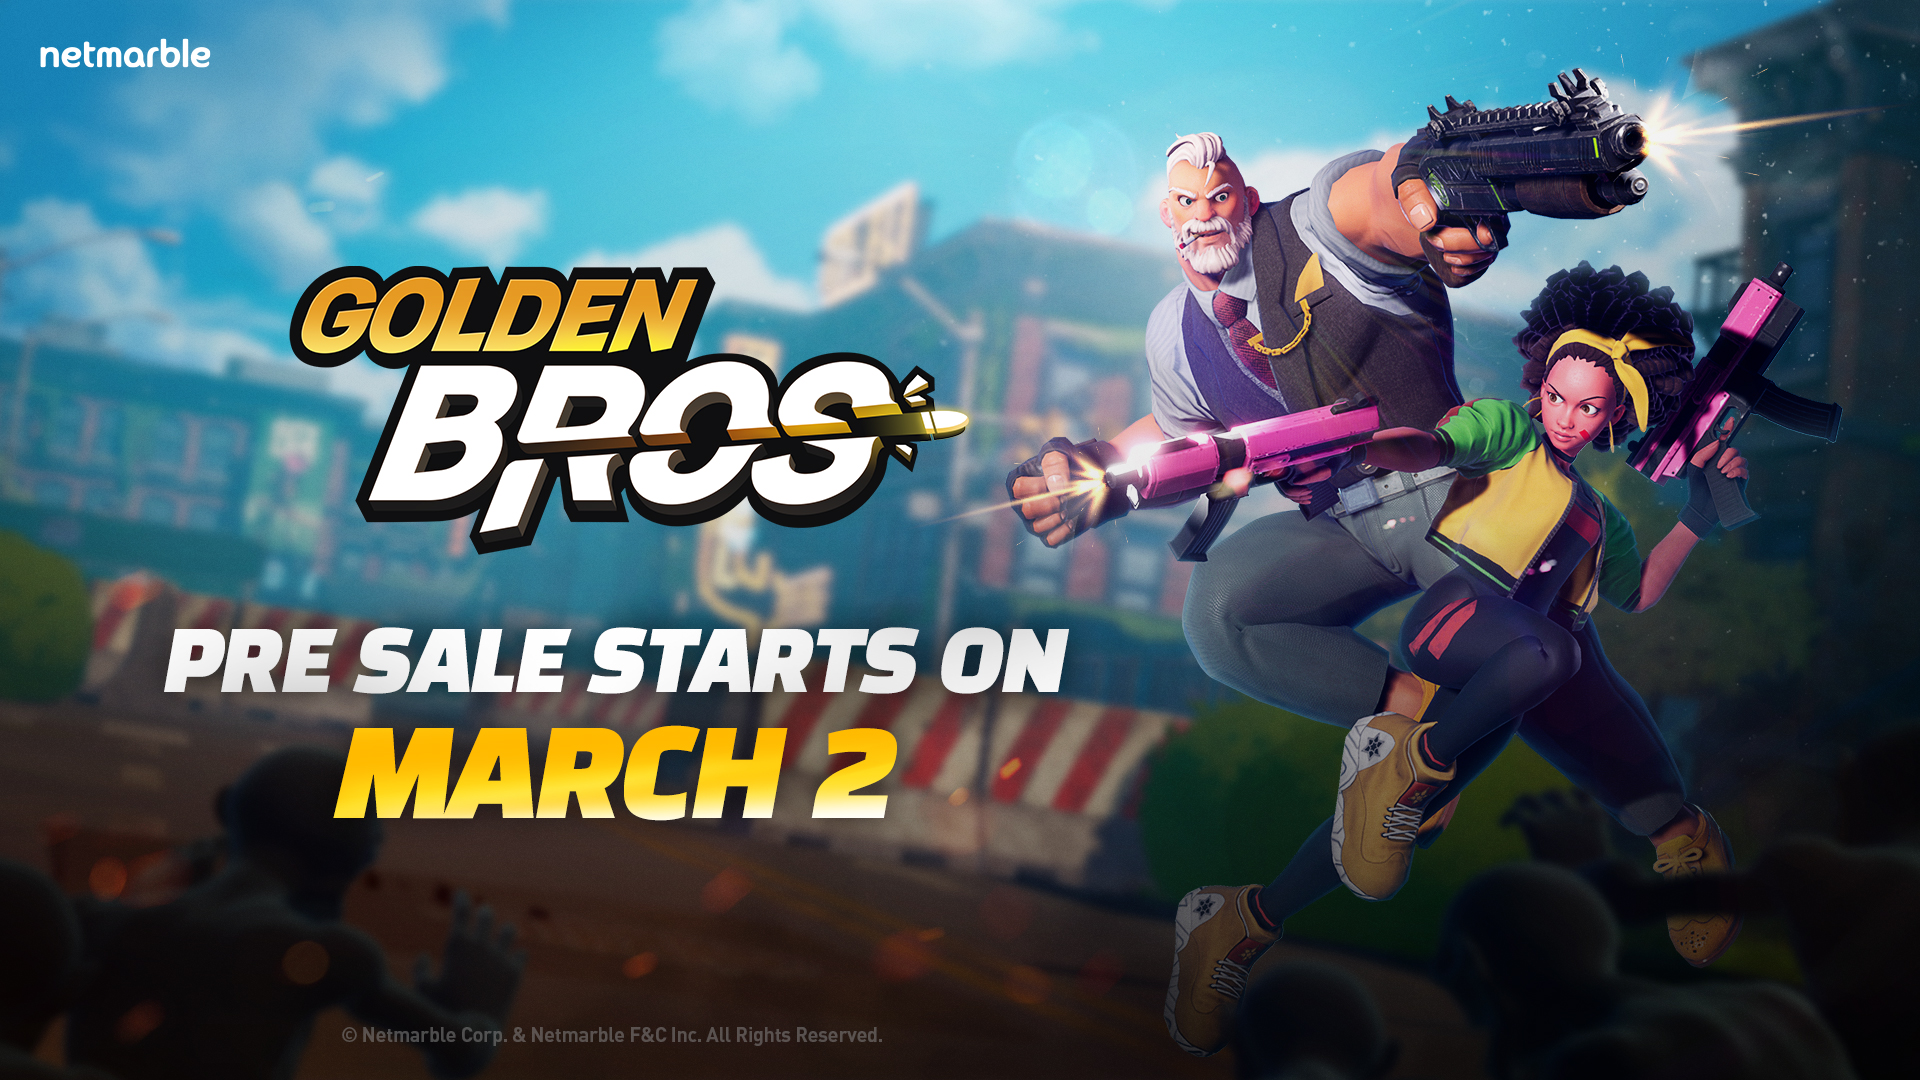 NETMARBLES CASUAL SHOOTING GAME, GOLDEN BROS DELIVERS PRESALE PLAN AND 2022 ROADMAP